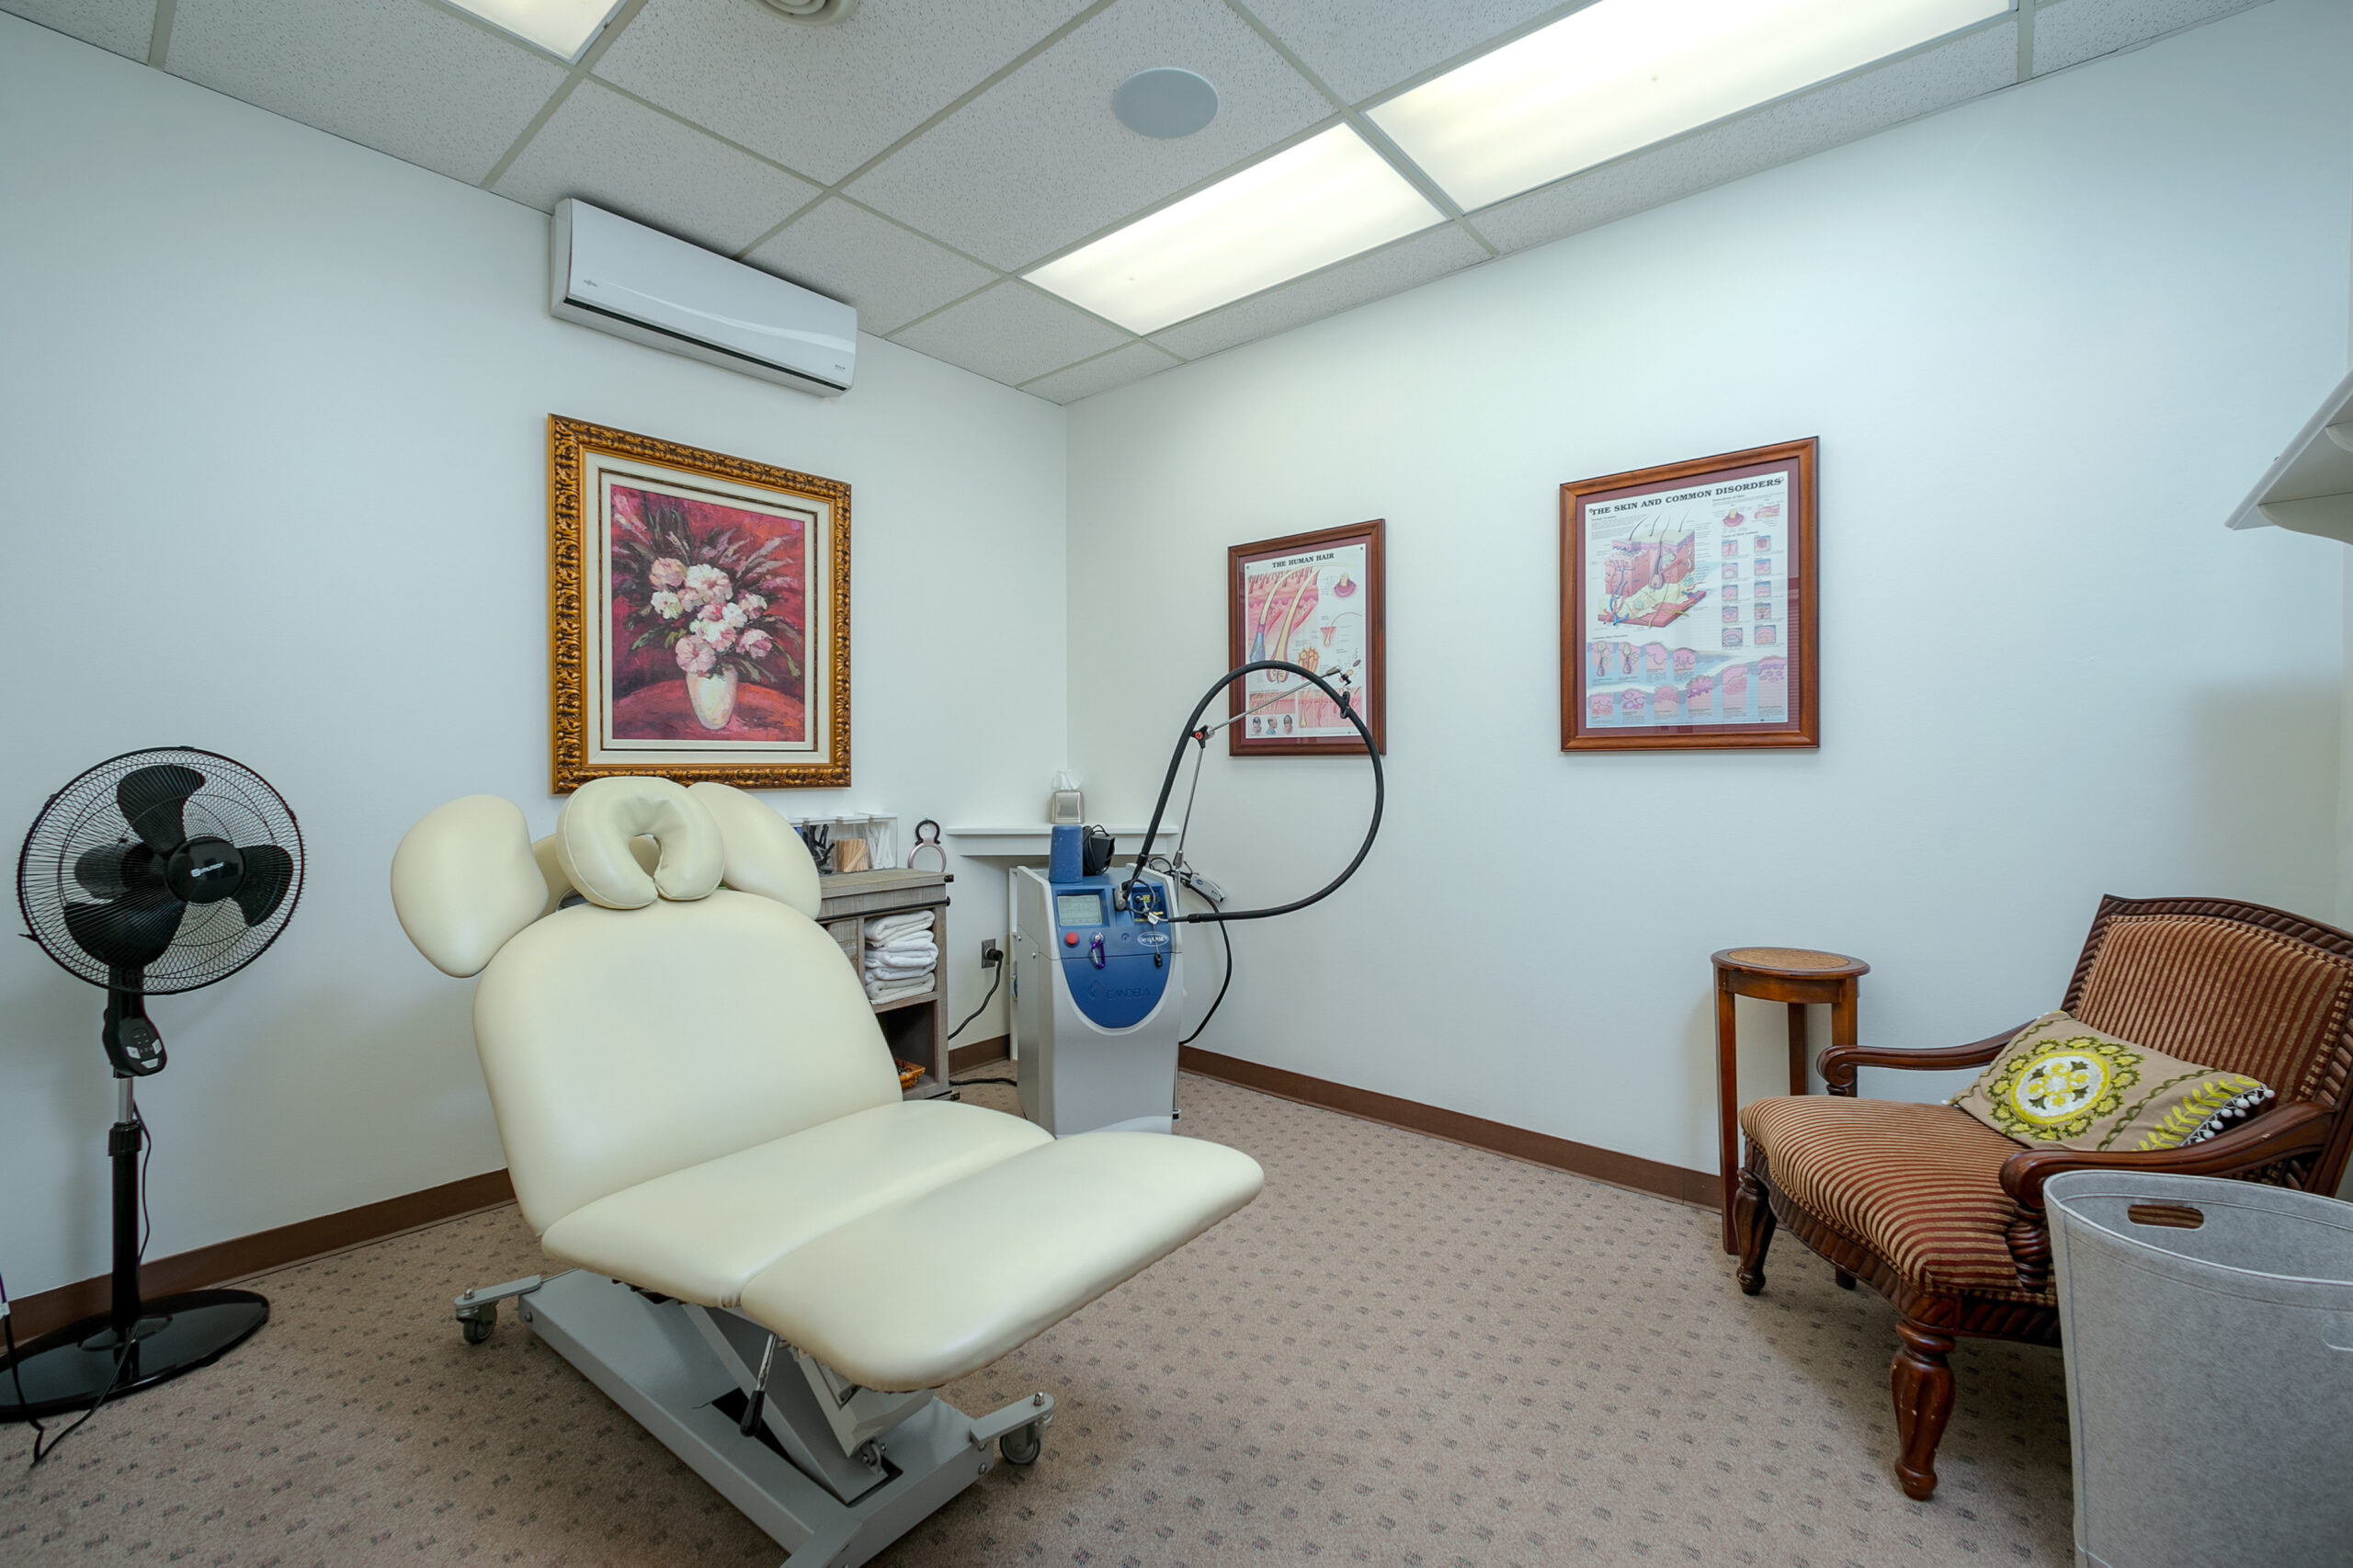 A room with chairs and equipment at Laser Hair & Skin Center of Monroeville, a med spa in Pittsburgh.